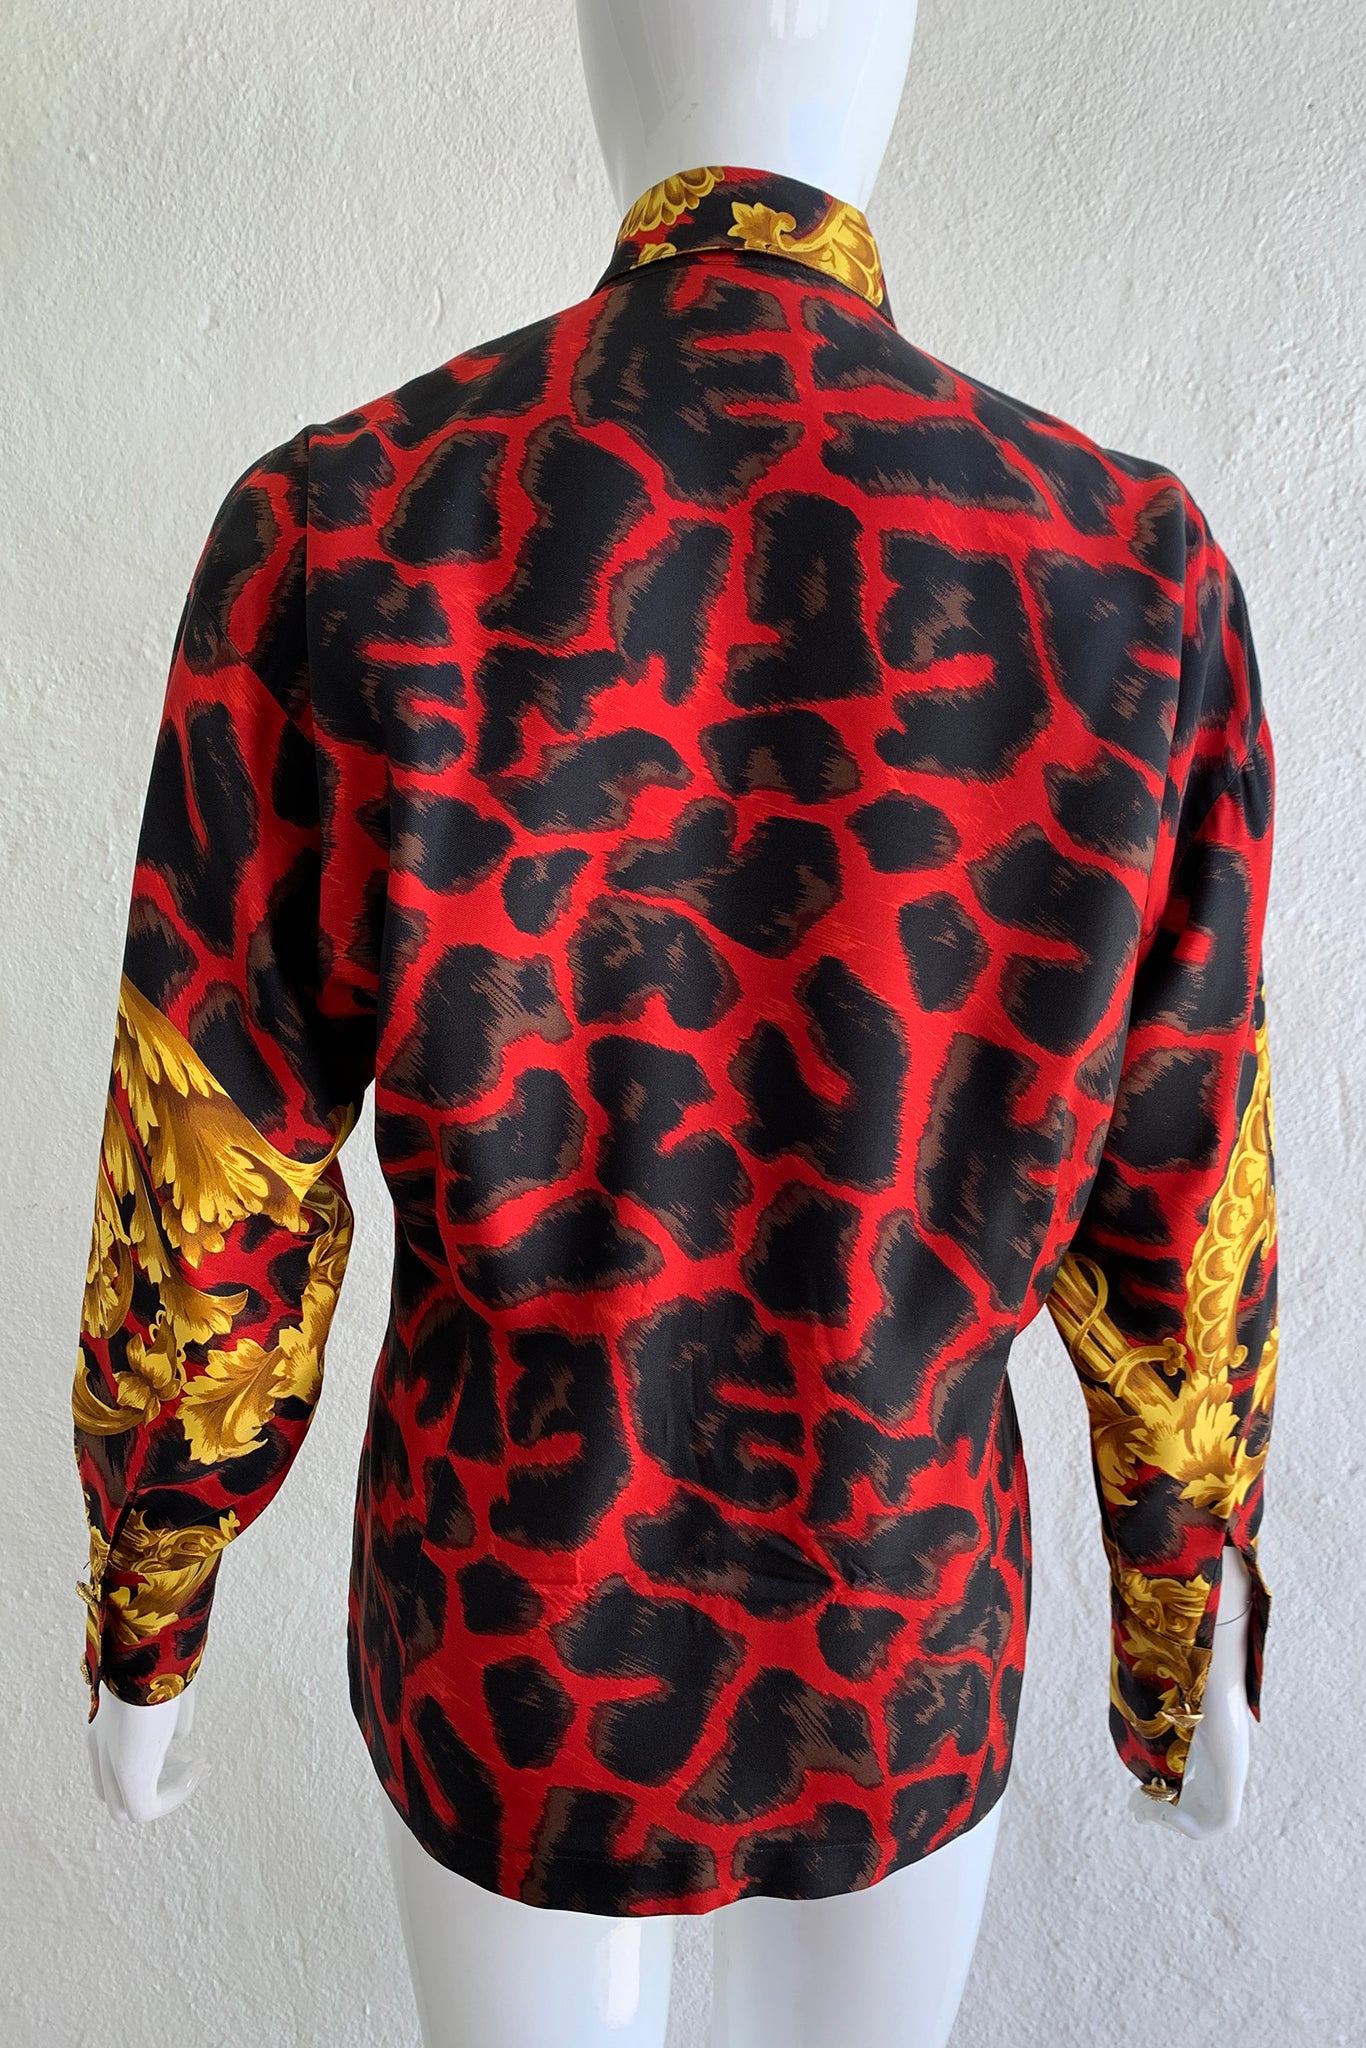 Vintage Gianni Versace Baroque Animal Print Silk Shirt on Mannequin back at Recess